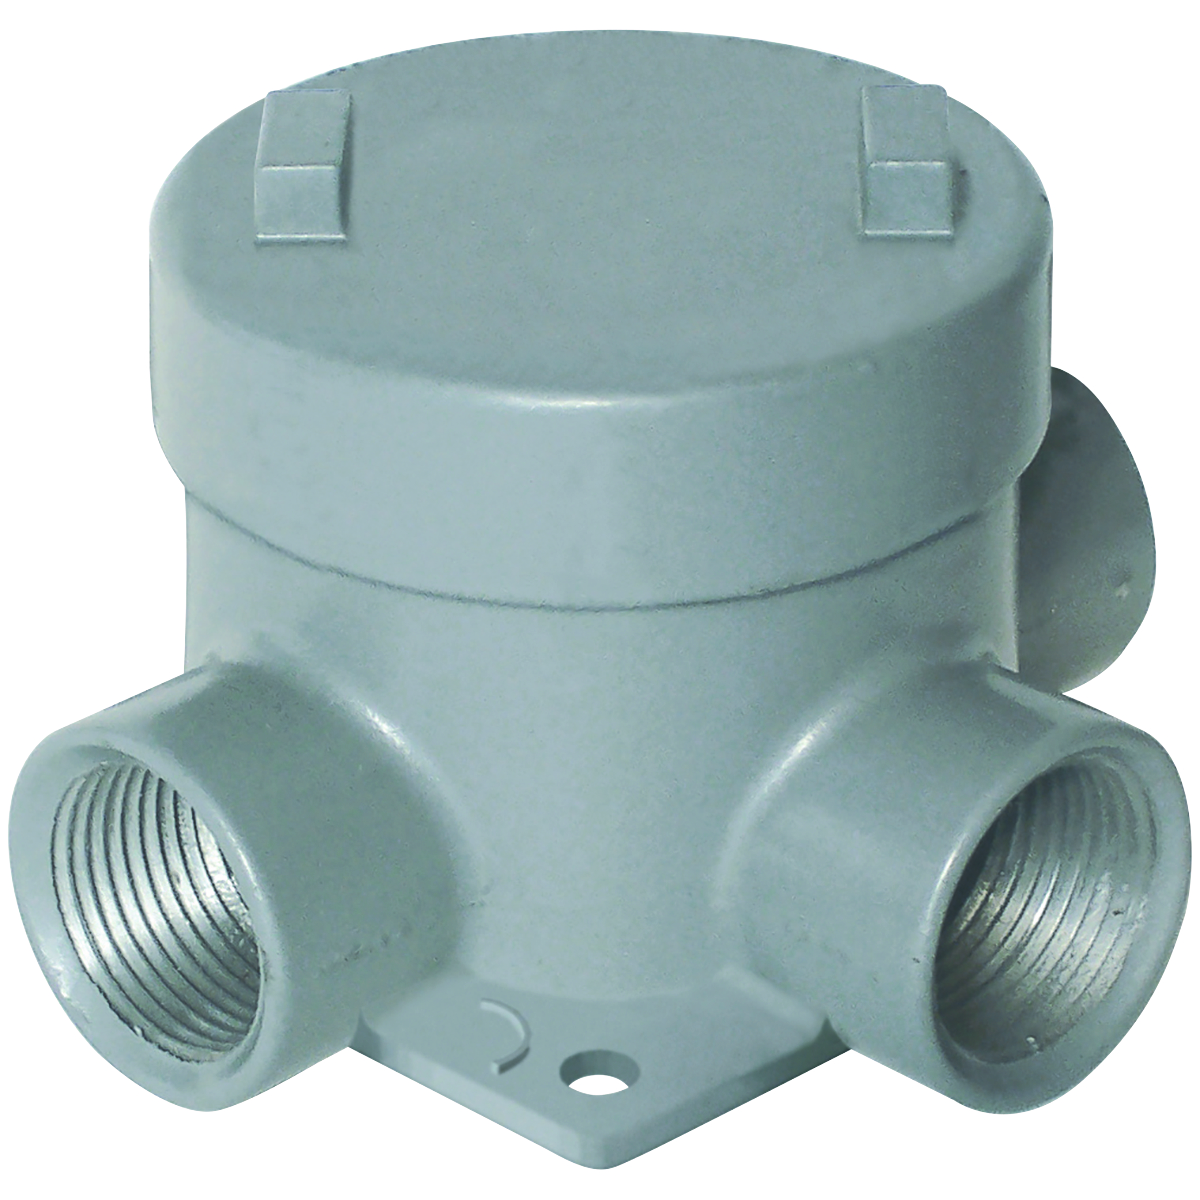 GEB SERIES - ALUMINUM OUTLET BODY - T TYPE - HUB SIZE 3/4 INCH (TWOHUBS) AND 1-1/2 INCH (ONE HUB) - VOLUME 29.0 CUBIC INCHES